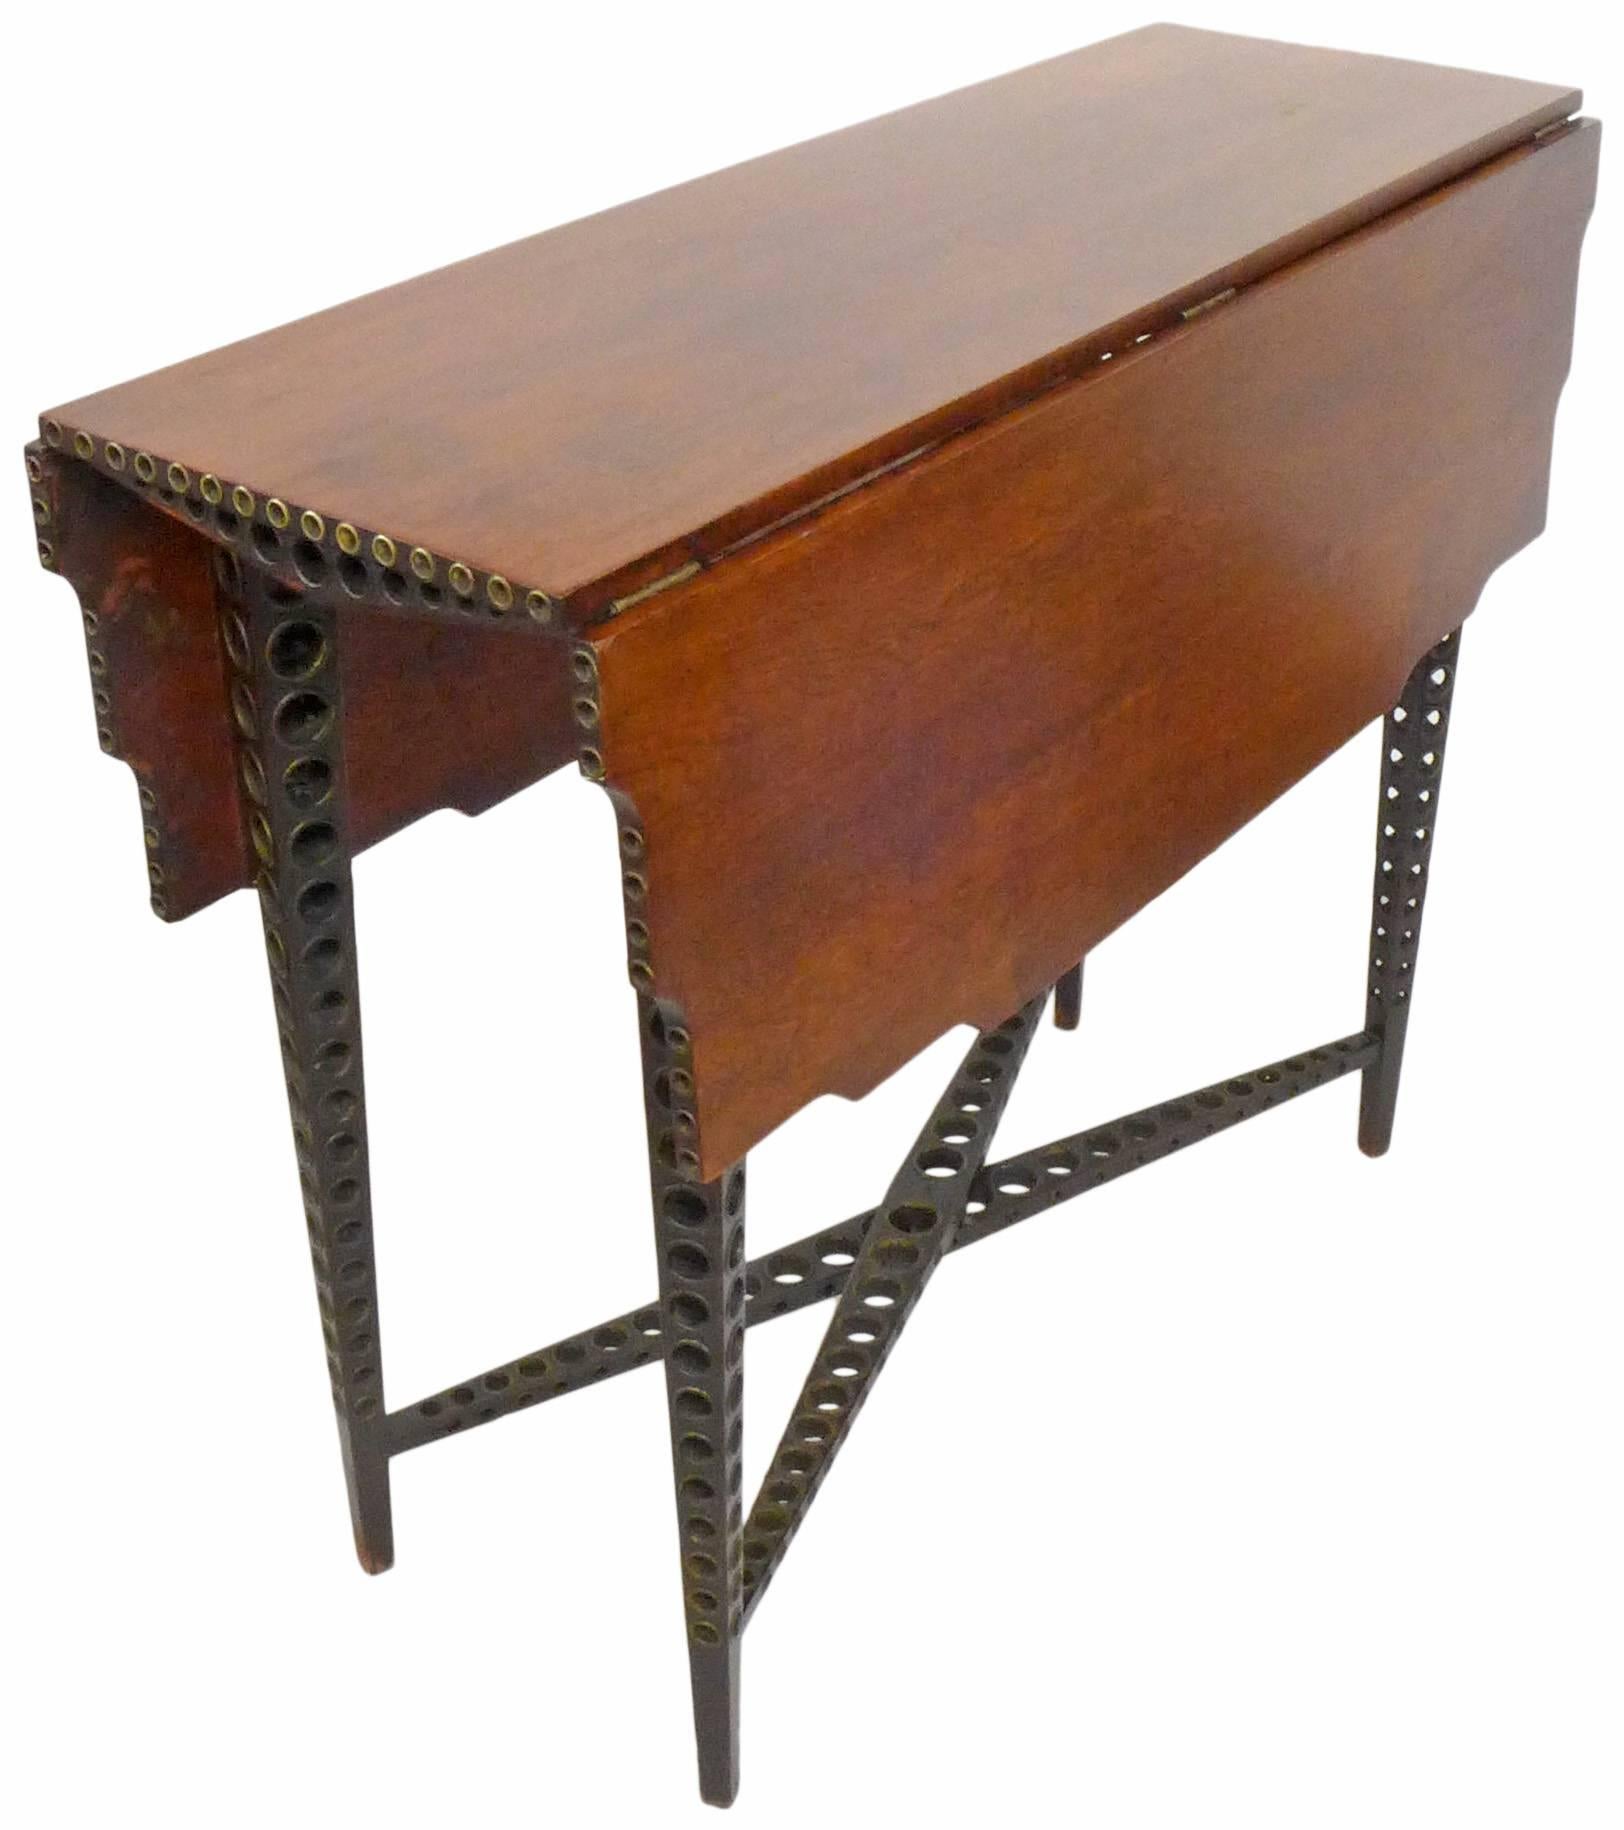 A wonderful and extremely unusual early 20th century drop-leaf table. Multi-directionally perforated, elegantly tapered legs and cross stretchers with graduated circles and brass grommet details. A gently scalloped top detail and additional